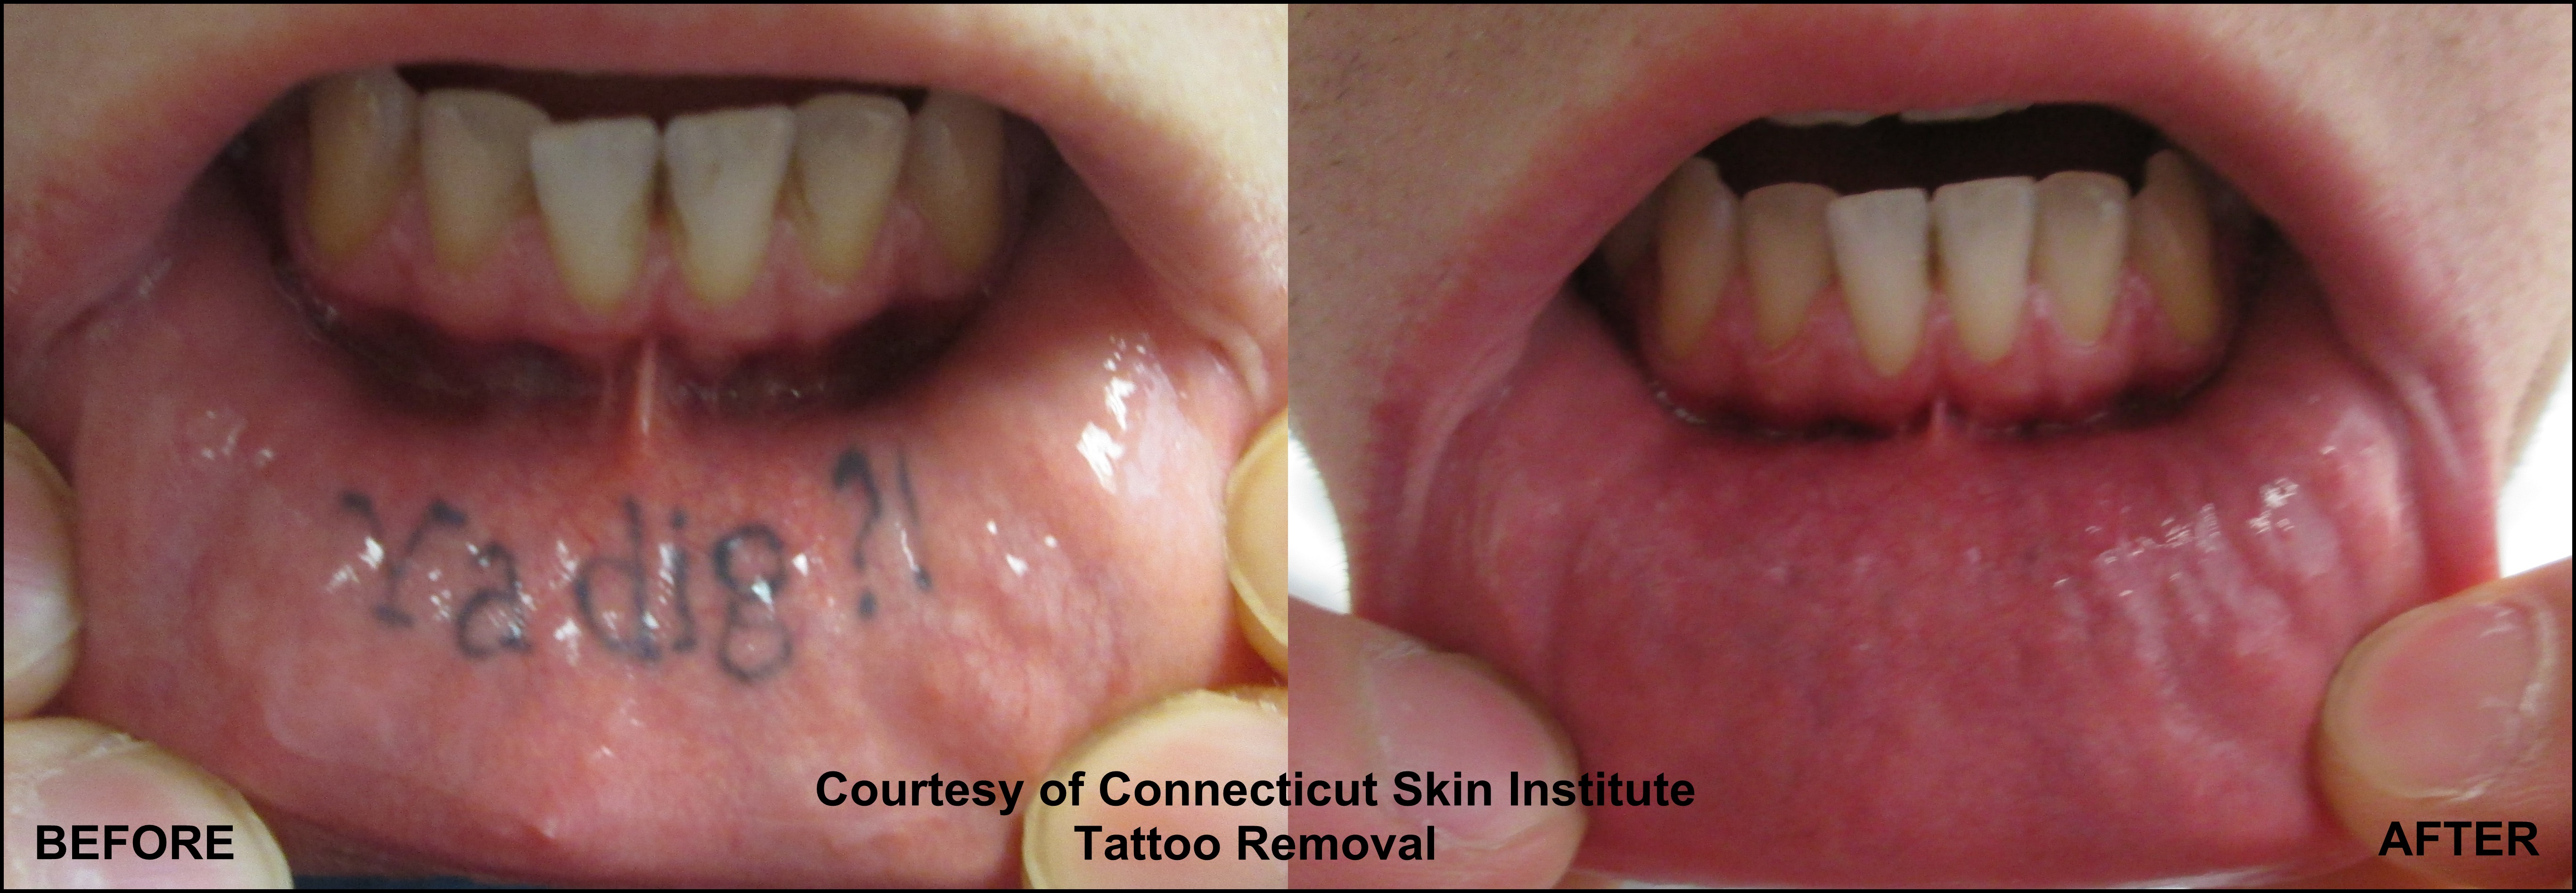 Laser Tattoo Removal Before and After - Connecticut Skin ...